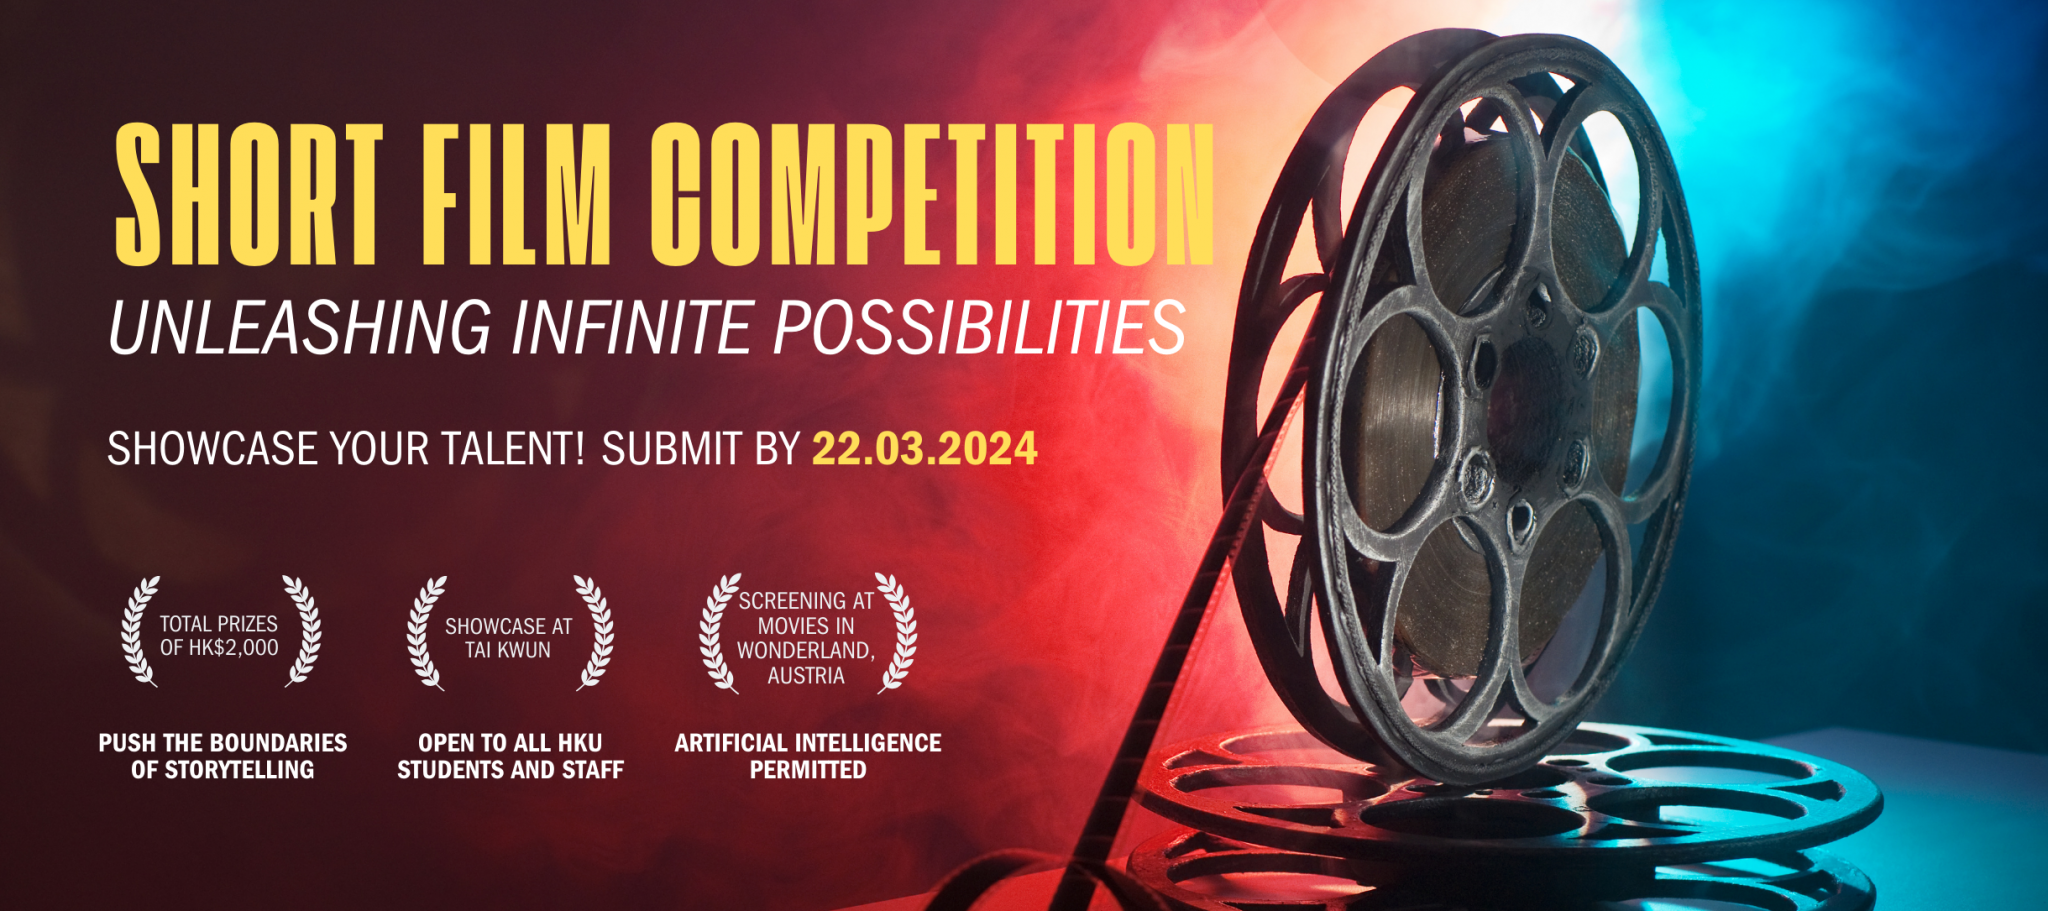 Short-Film-Competition-banner-2439-x-1085-px-1-2048x911